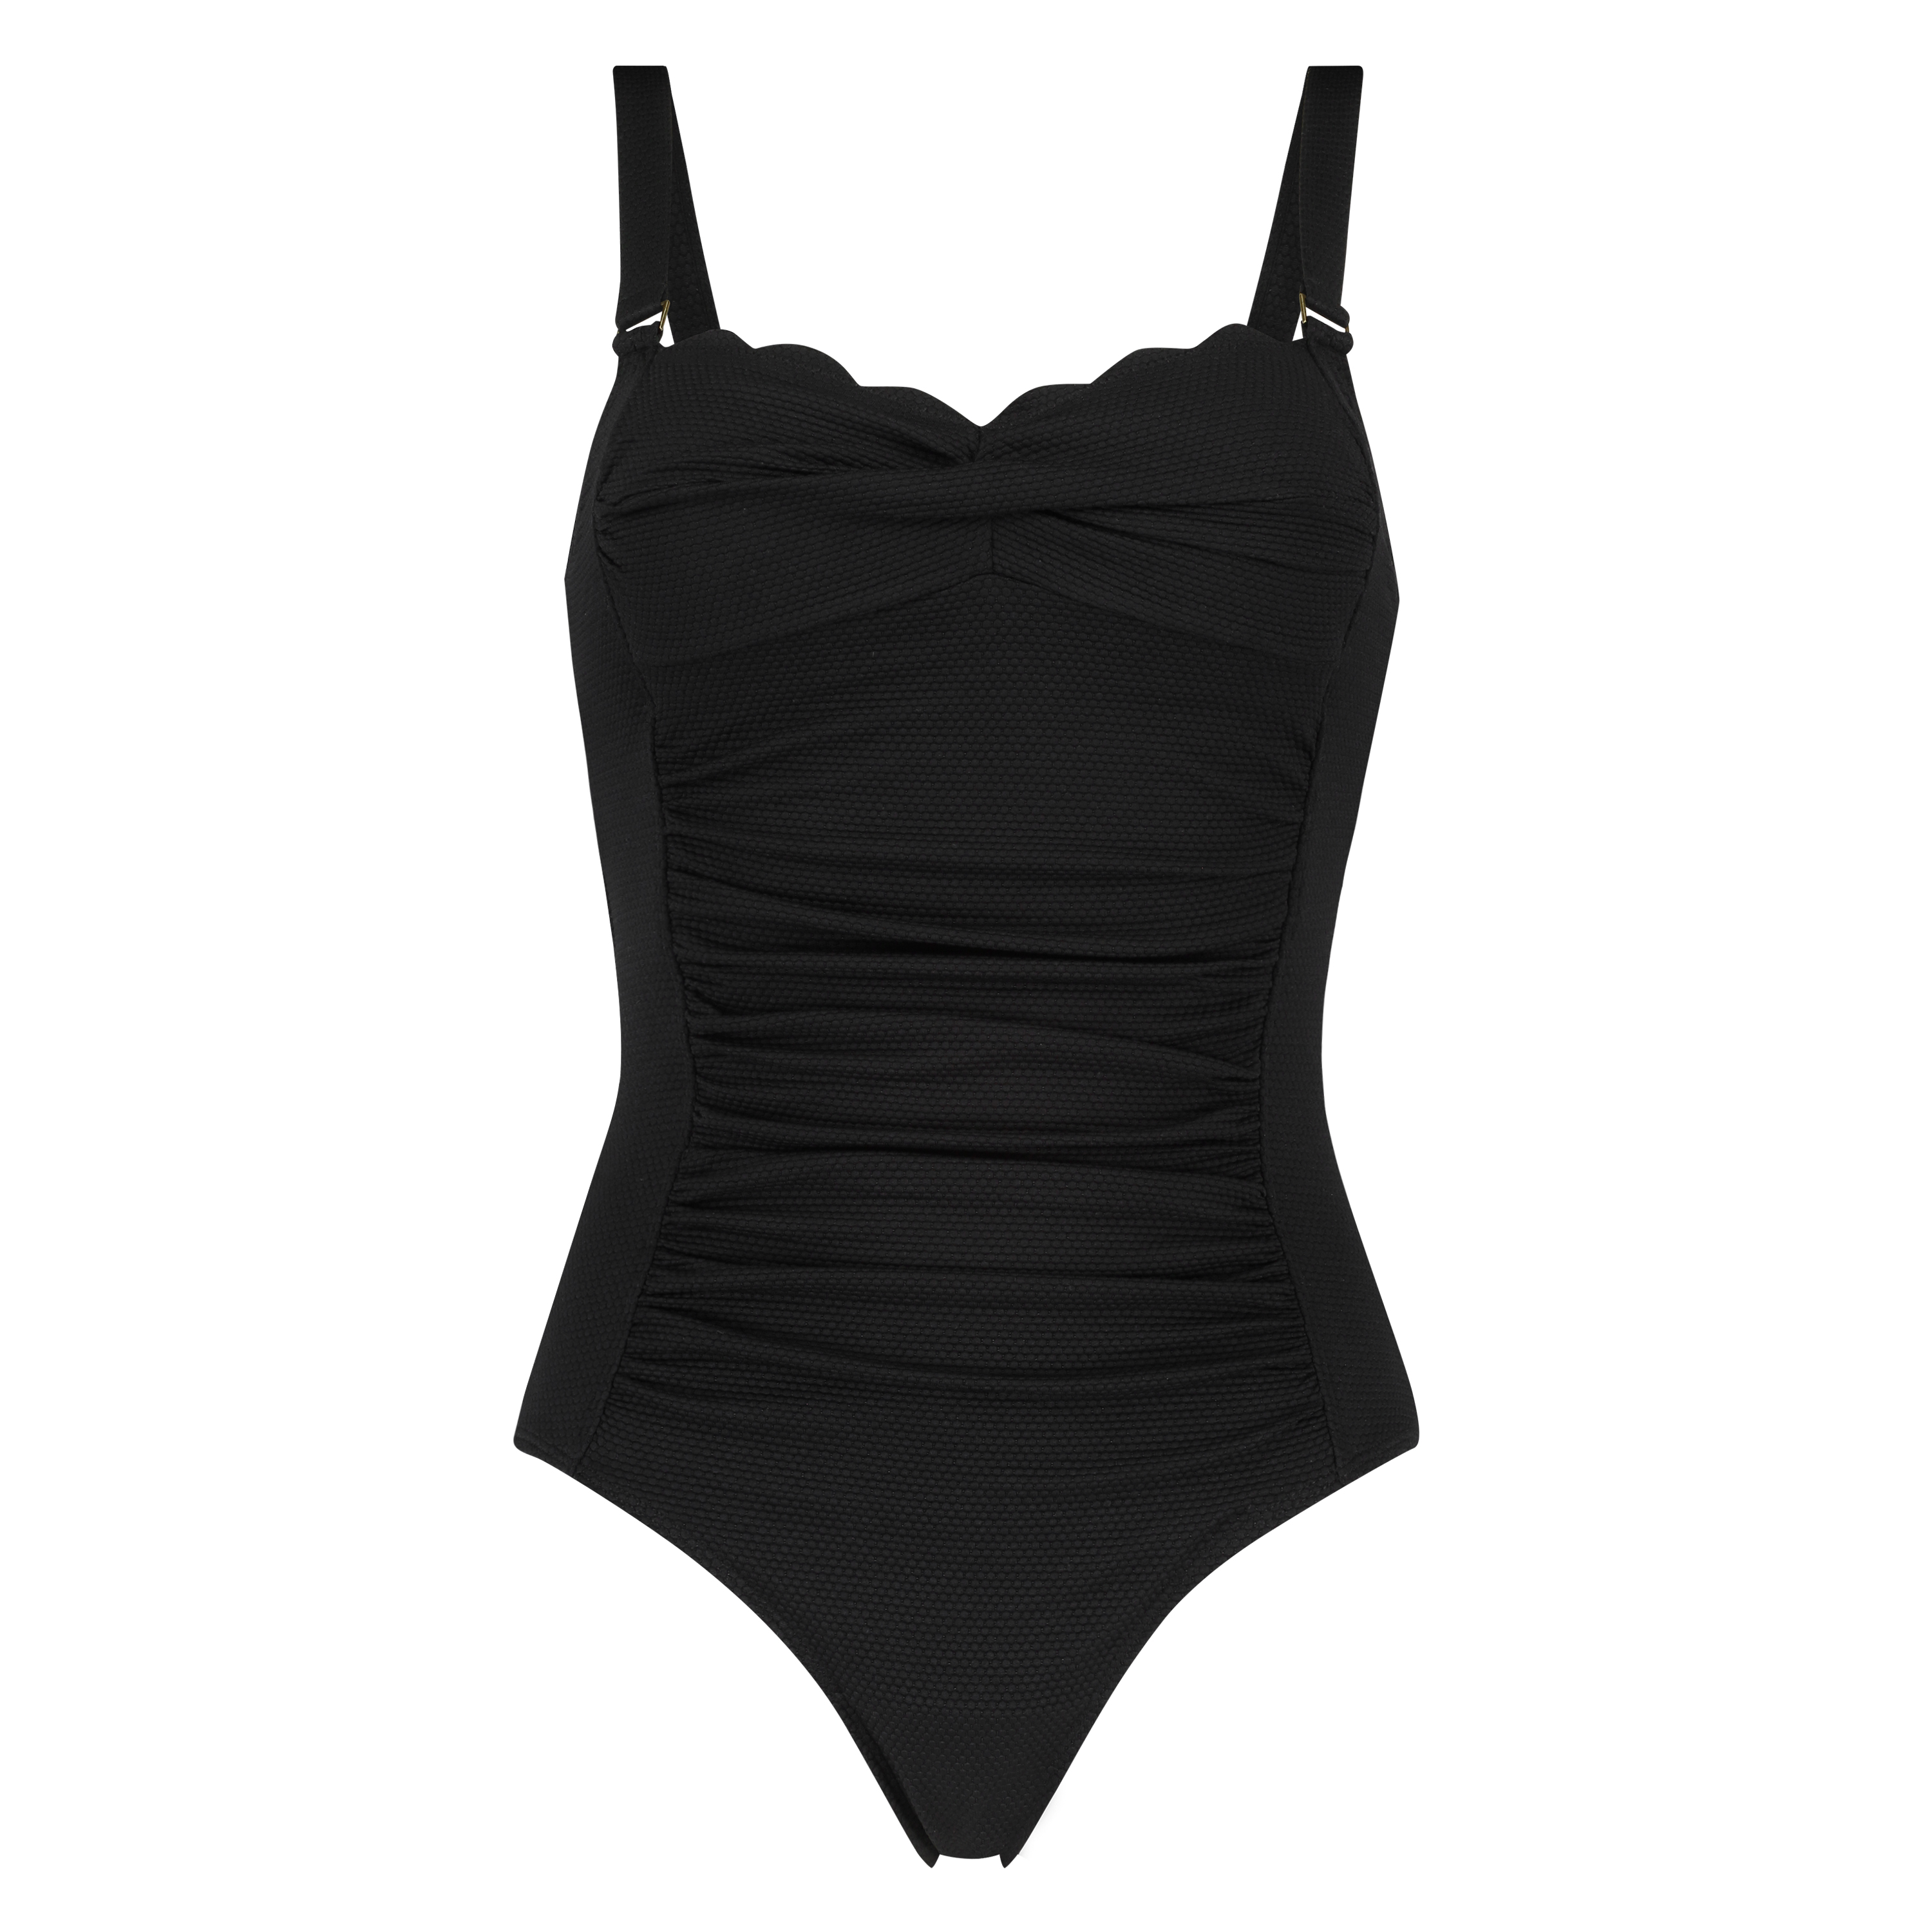 Scallop Dreams Ocean Swimsuit for £49 - Swimsuits - Hunkemöller